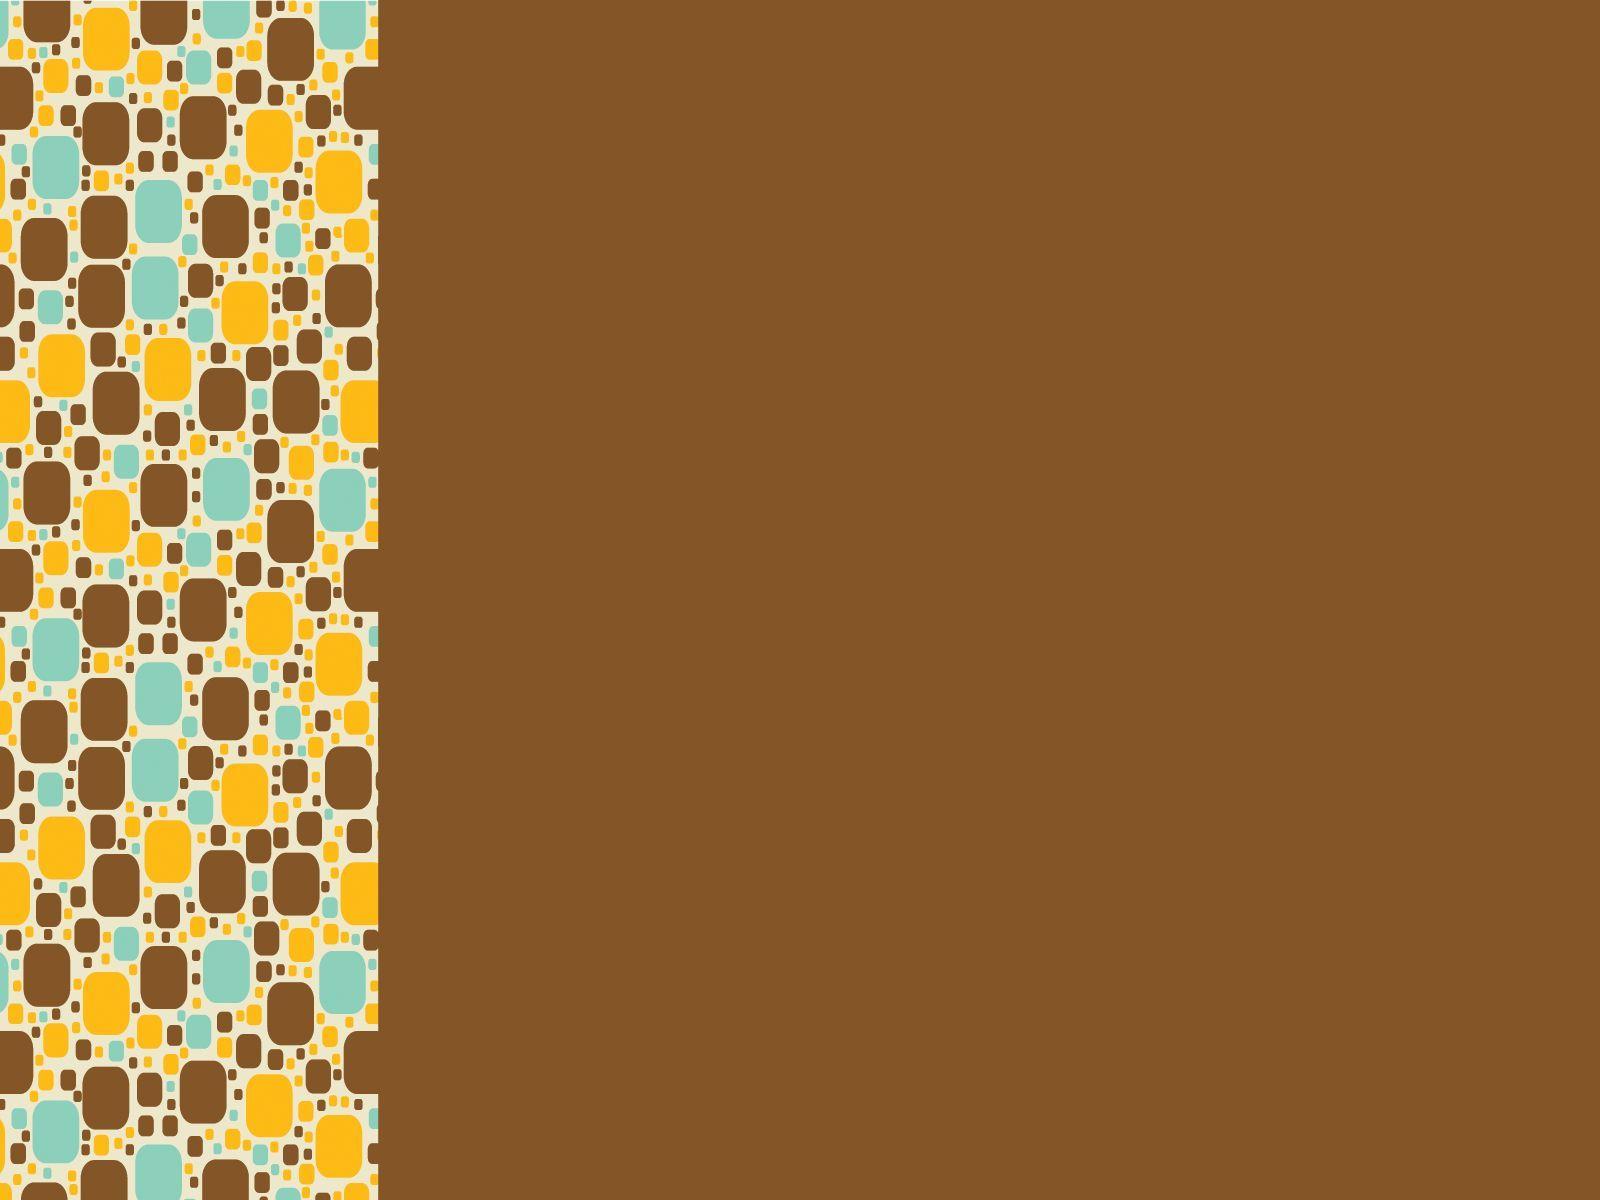 Little Squares Powerpoint & Frames, Brown